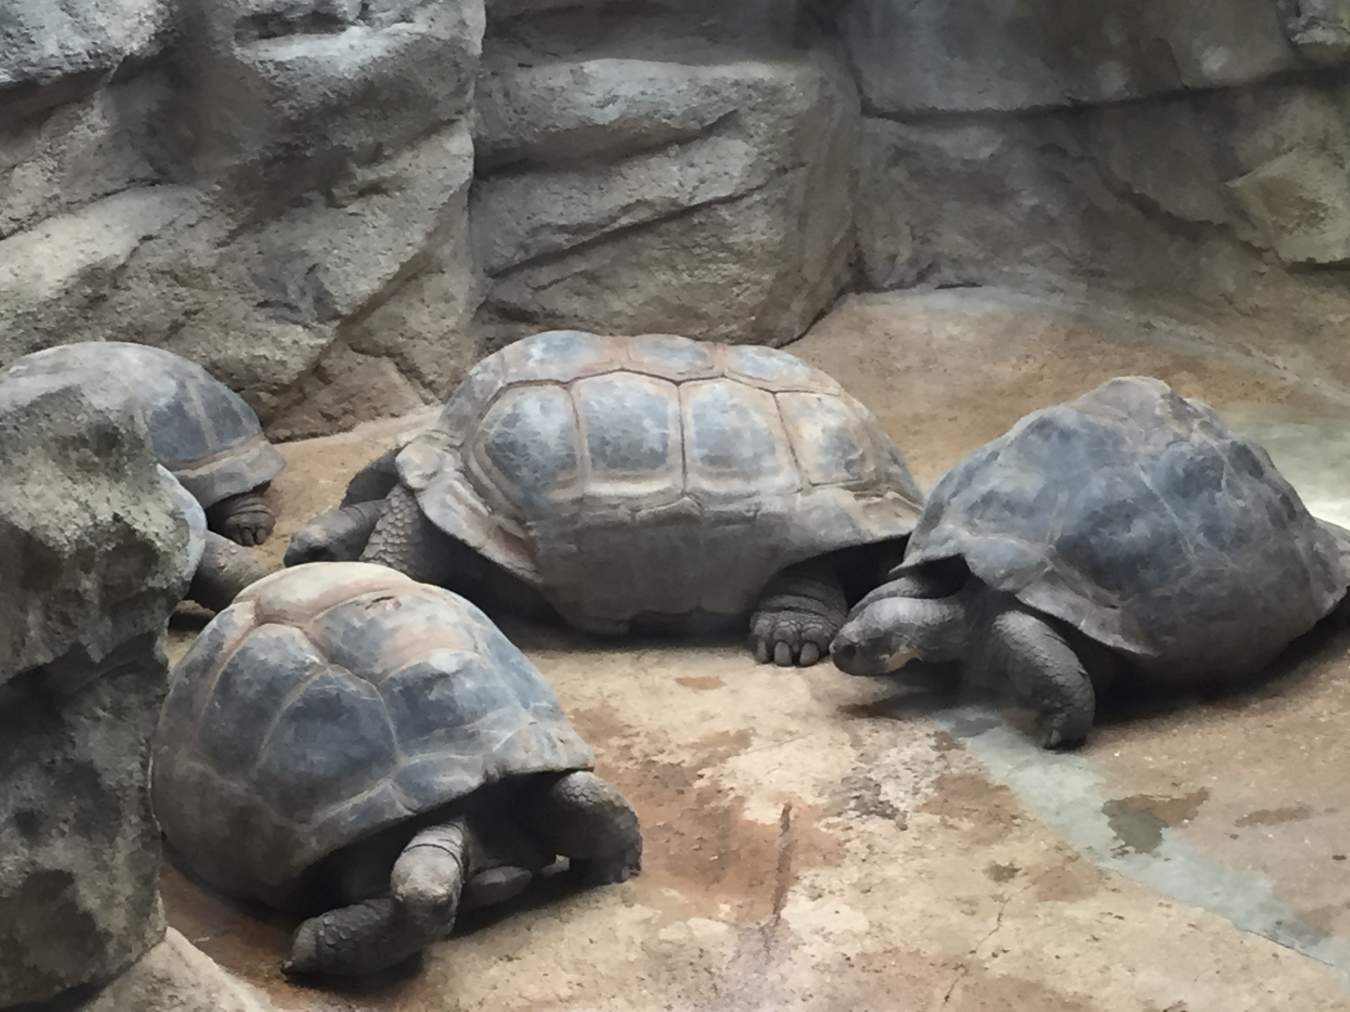 Tortoises at the St Louis Zoo